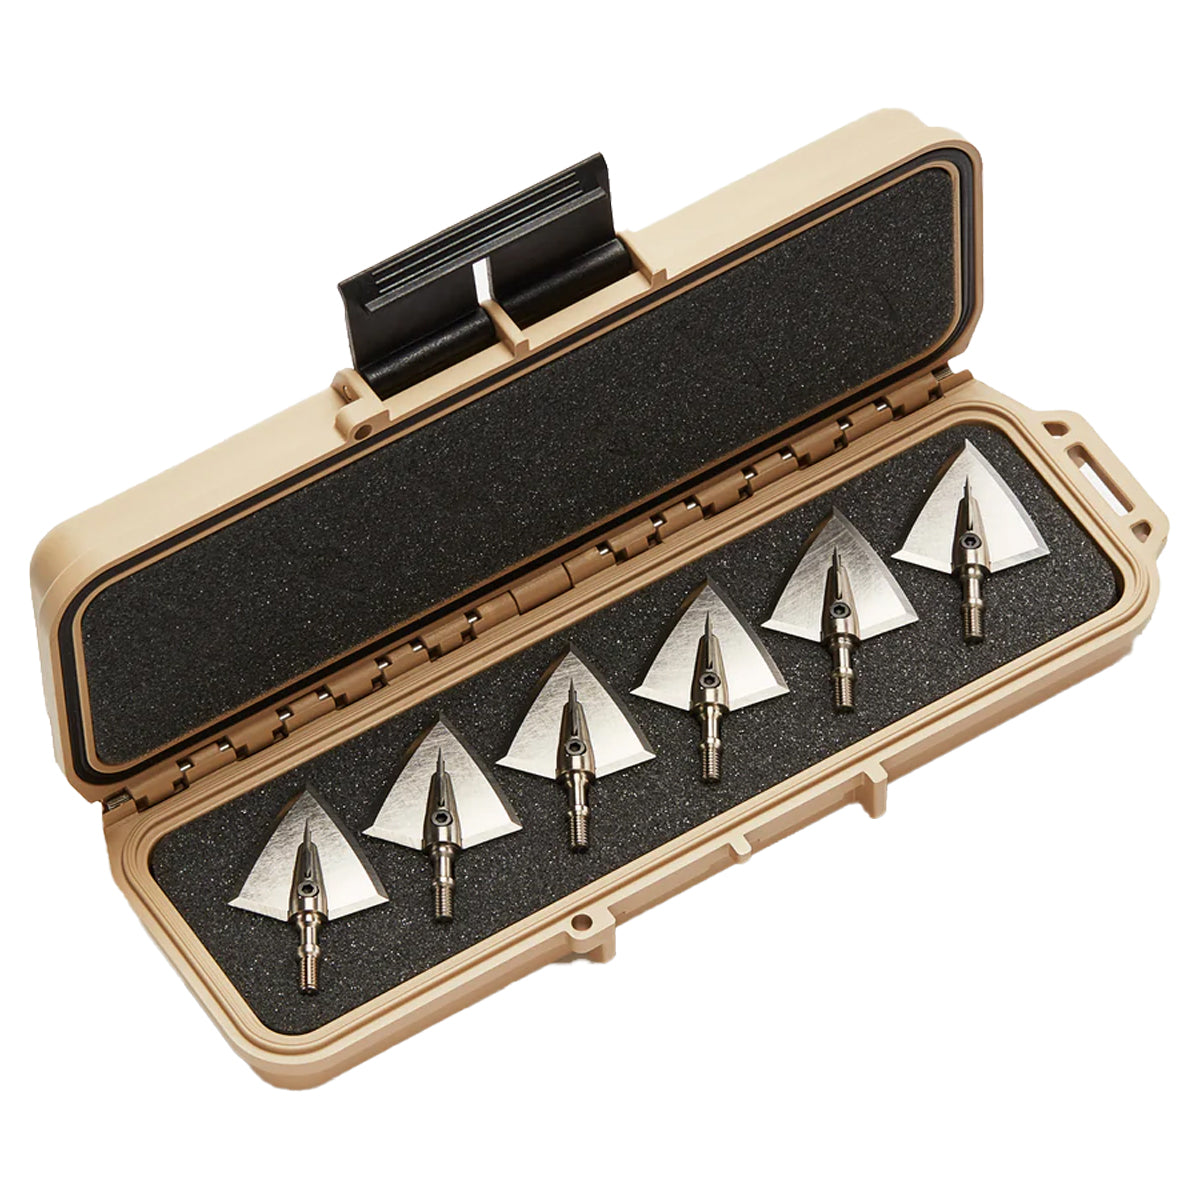 Day Six Gear Evo 125 Grain Broadheads - 6 Pack with SKB Hard Case in  by GOHUNT | Day Six - GOHUNT Shop